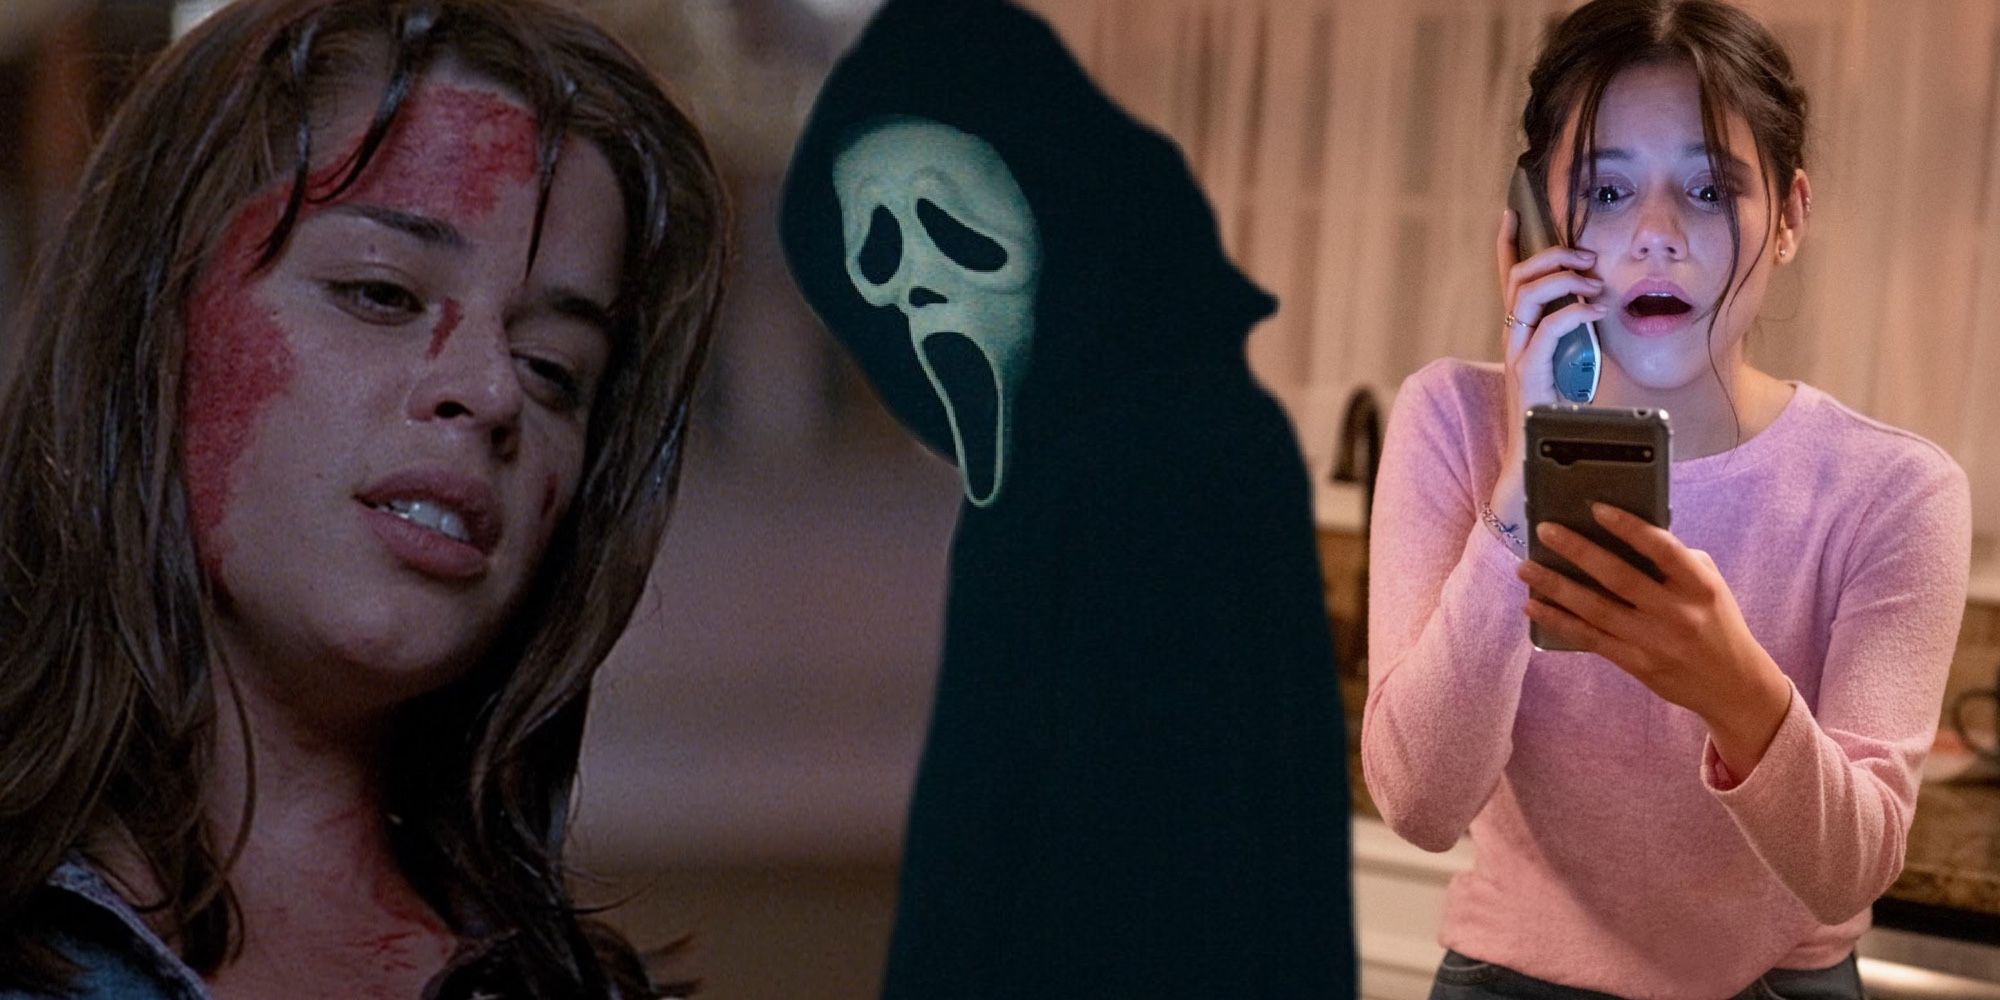 The Scream Franchise’s Three-Movie Plan Makes Its Direction Change More Disappointing